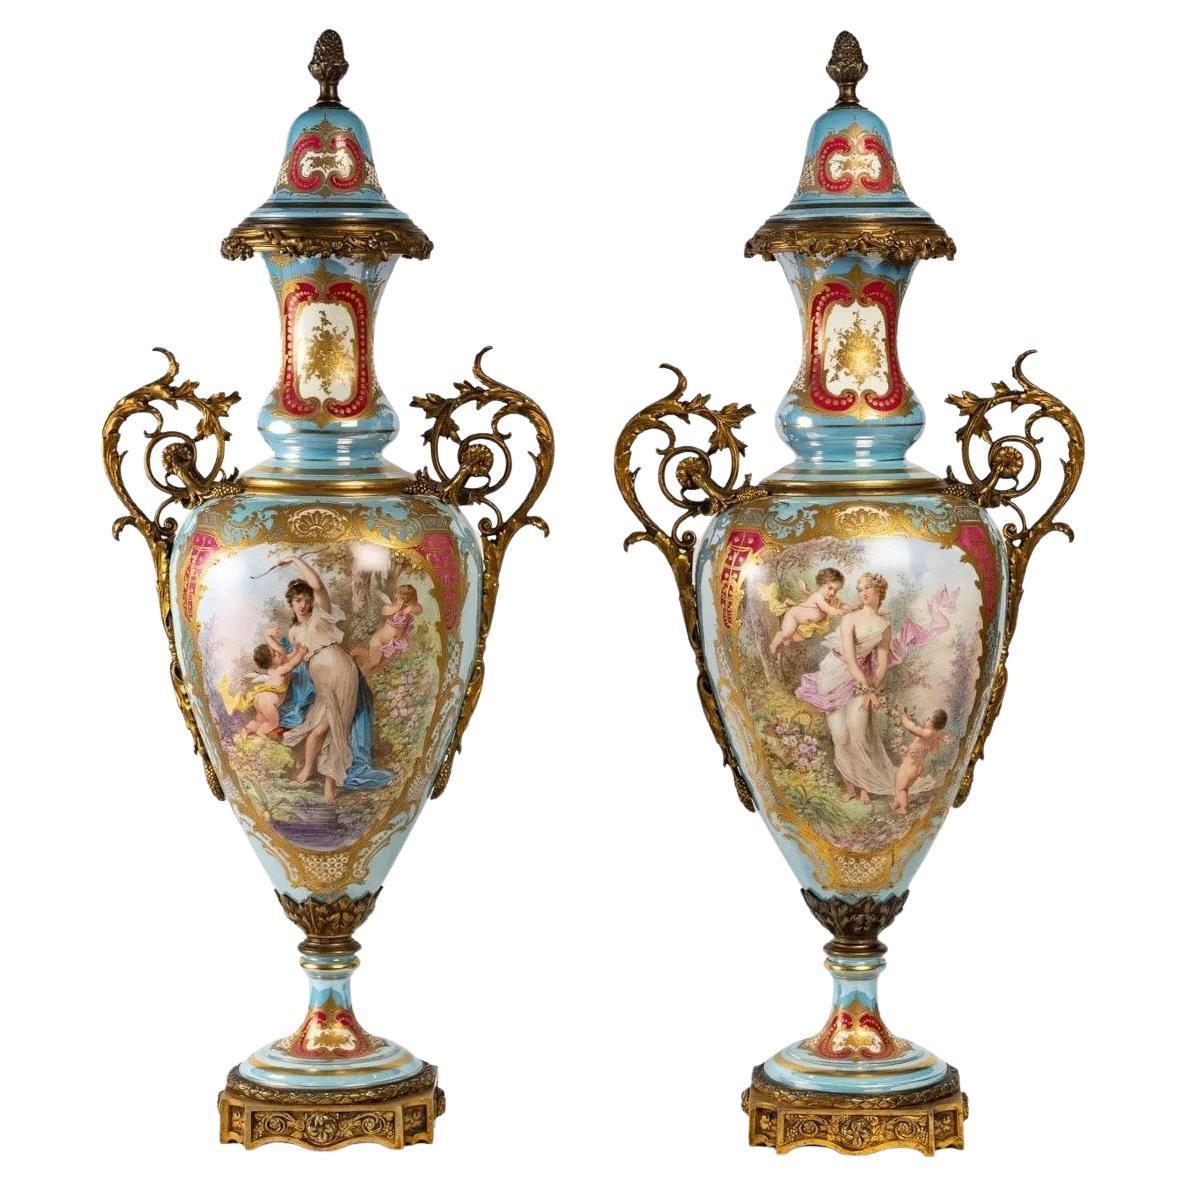 Very Important Pair of bright turquoise Sèvres Porcelain Vases, signed Sèvres 4